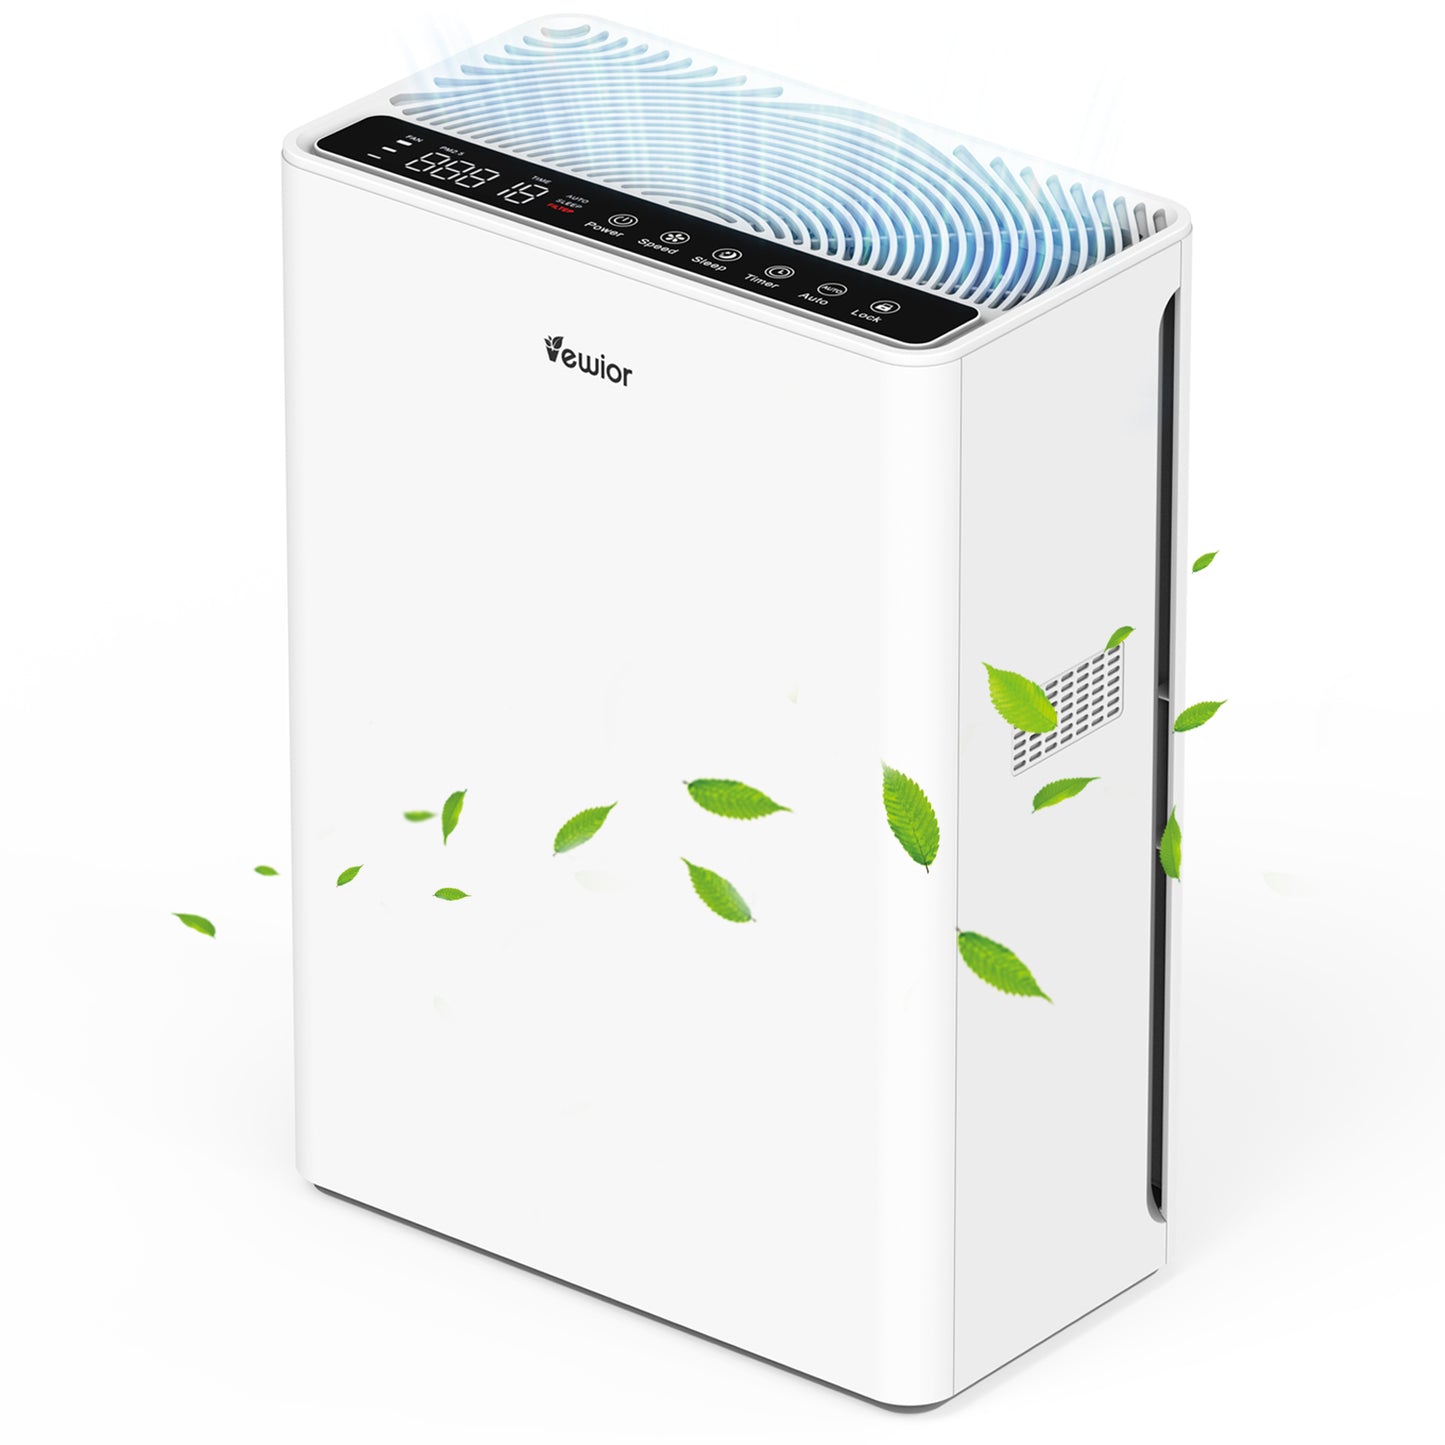 Levoit True HEPA Air Purifier White Medium Room with Extra Filter